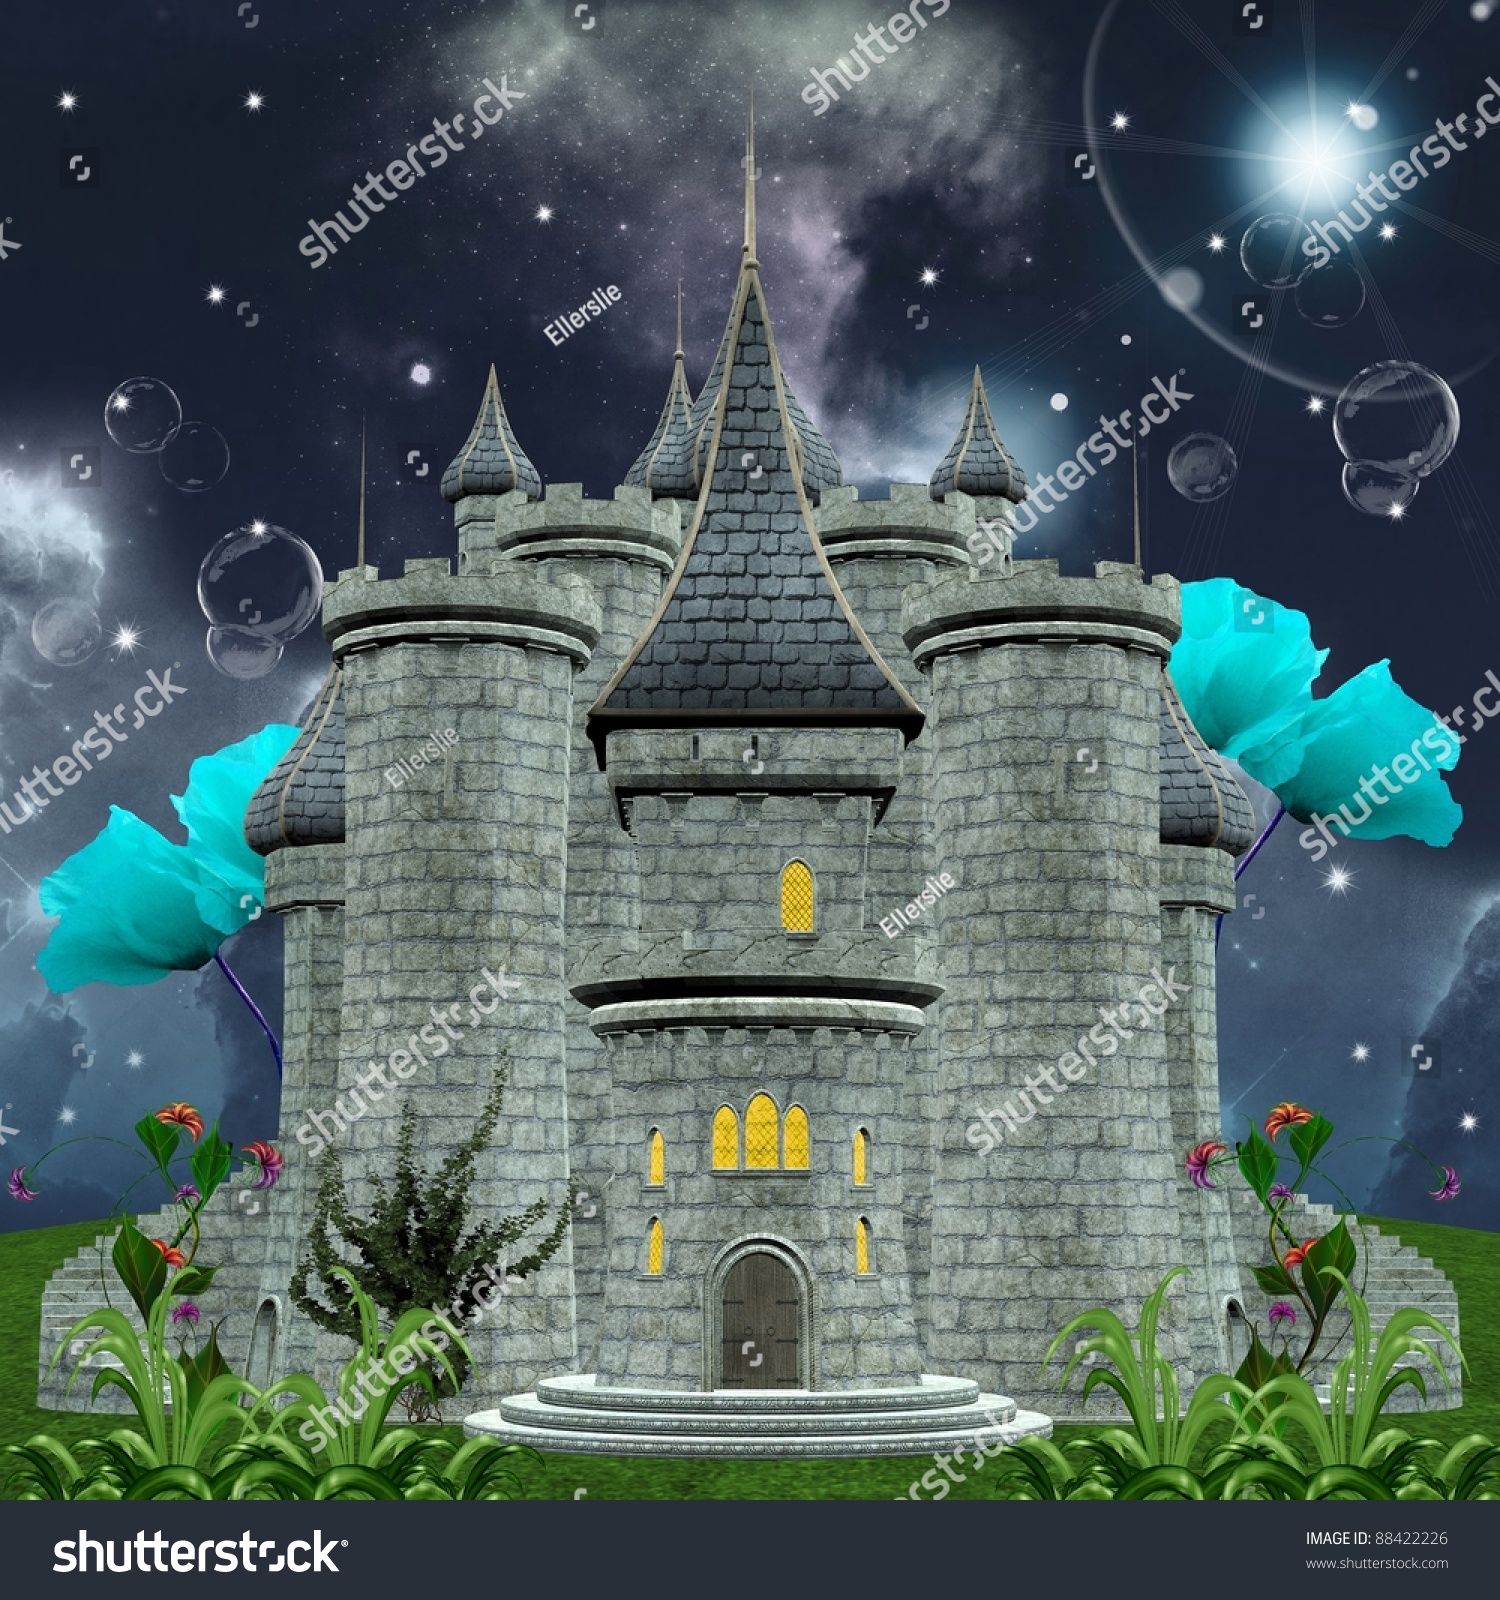 Fairy Tale Series Dreamland Castle By Stock Illustration 88422226